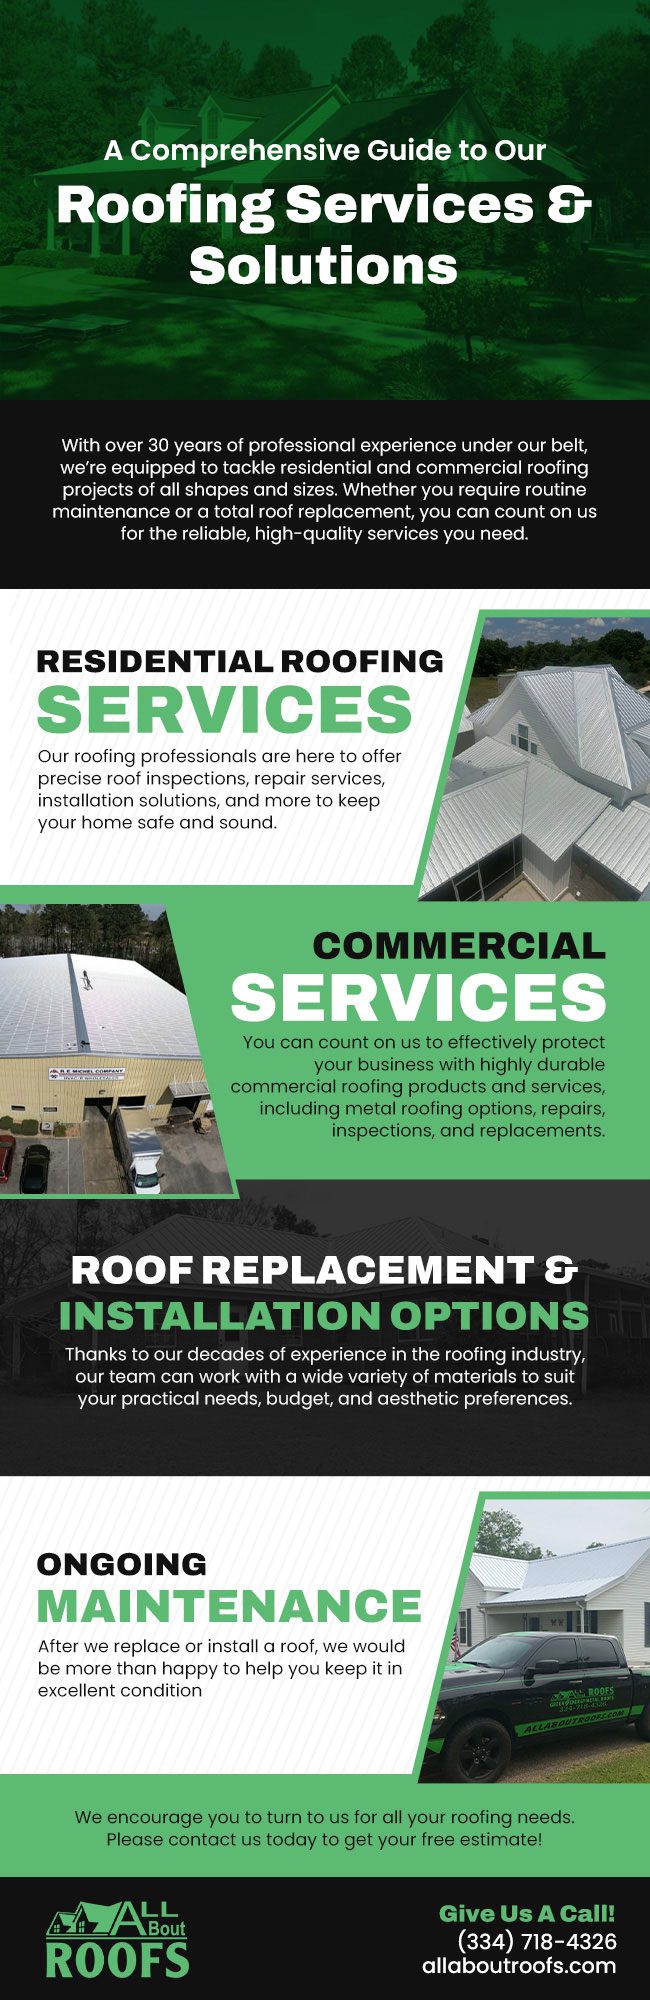 A Comprehensive Guide to Our Roofing Services & Solutions